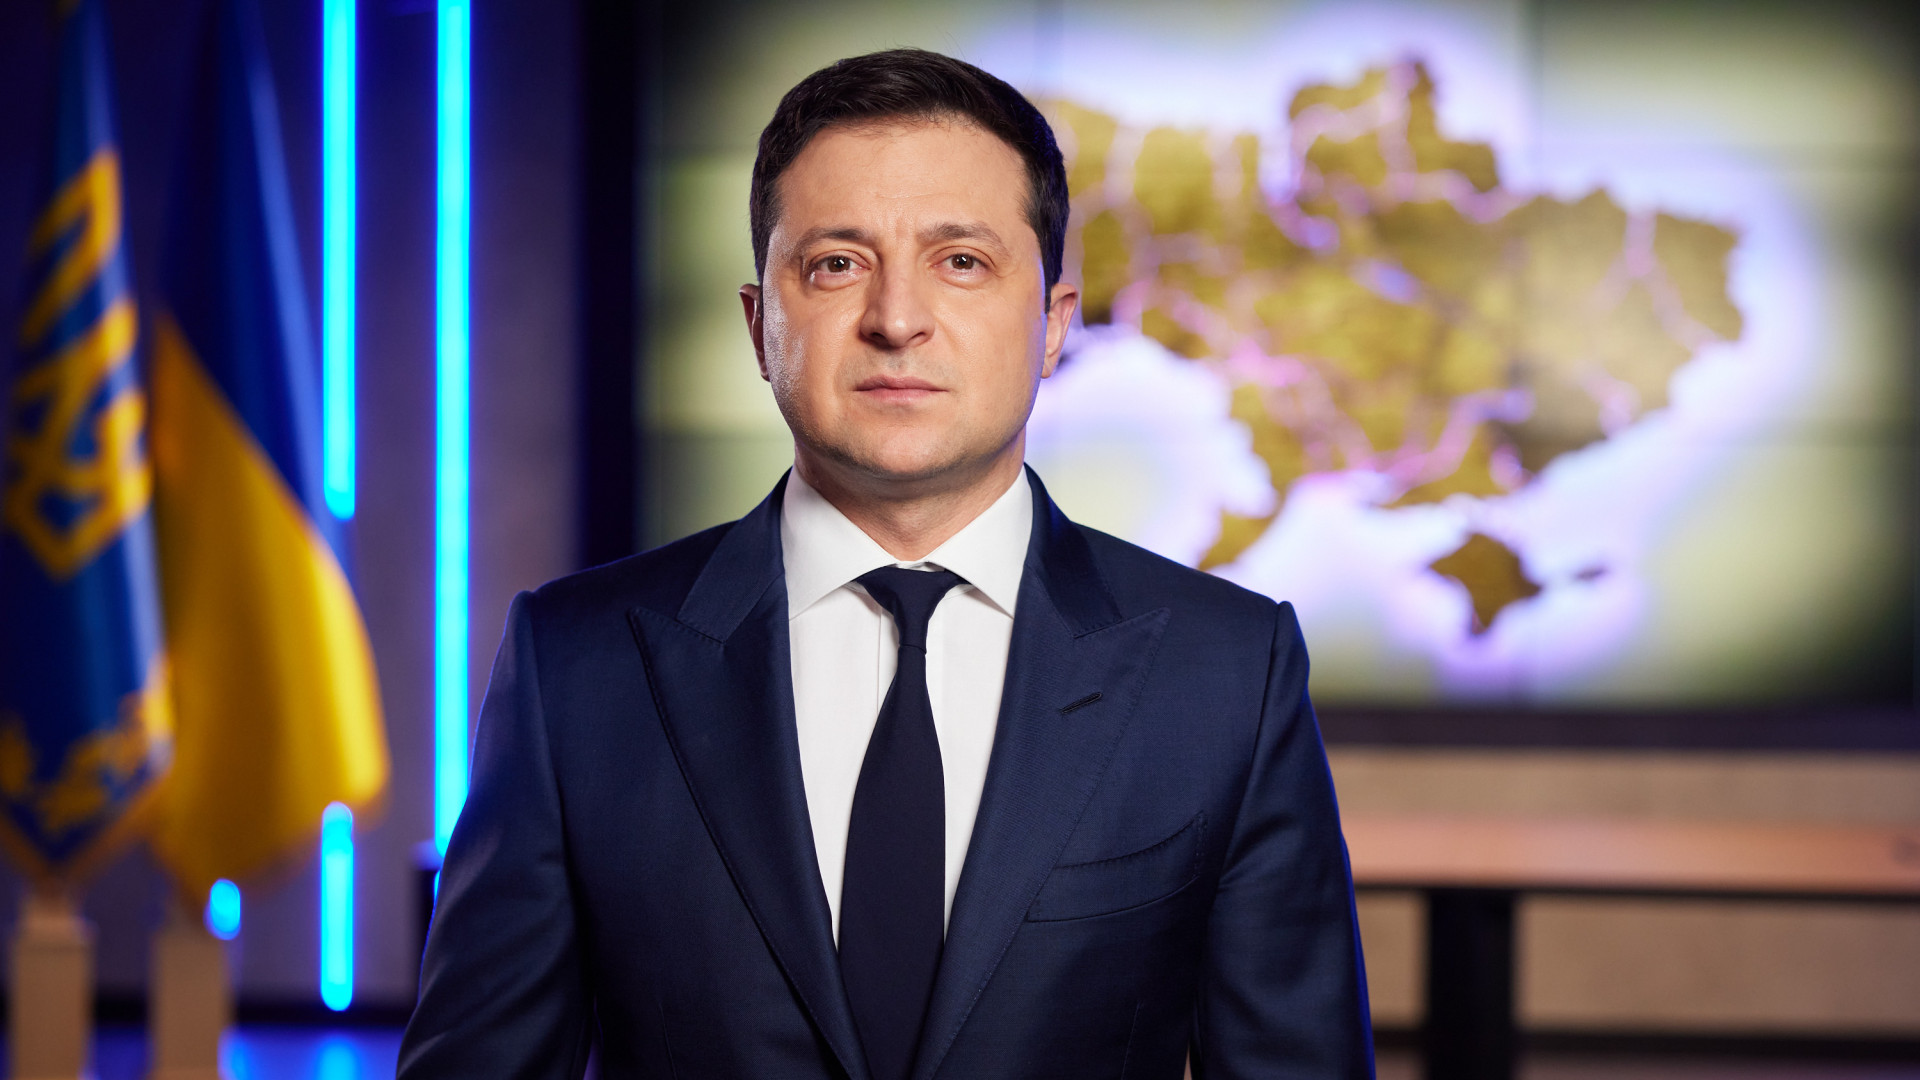 The President of Ukraine announced that reservists will be called up